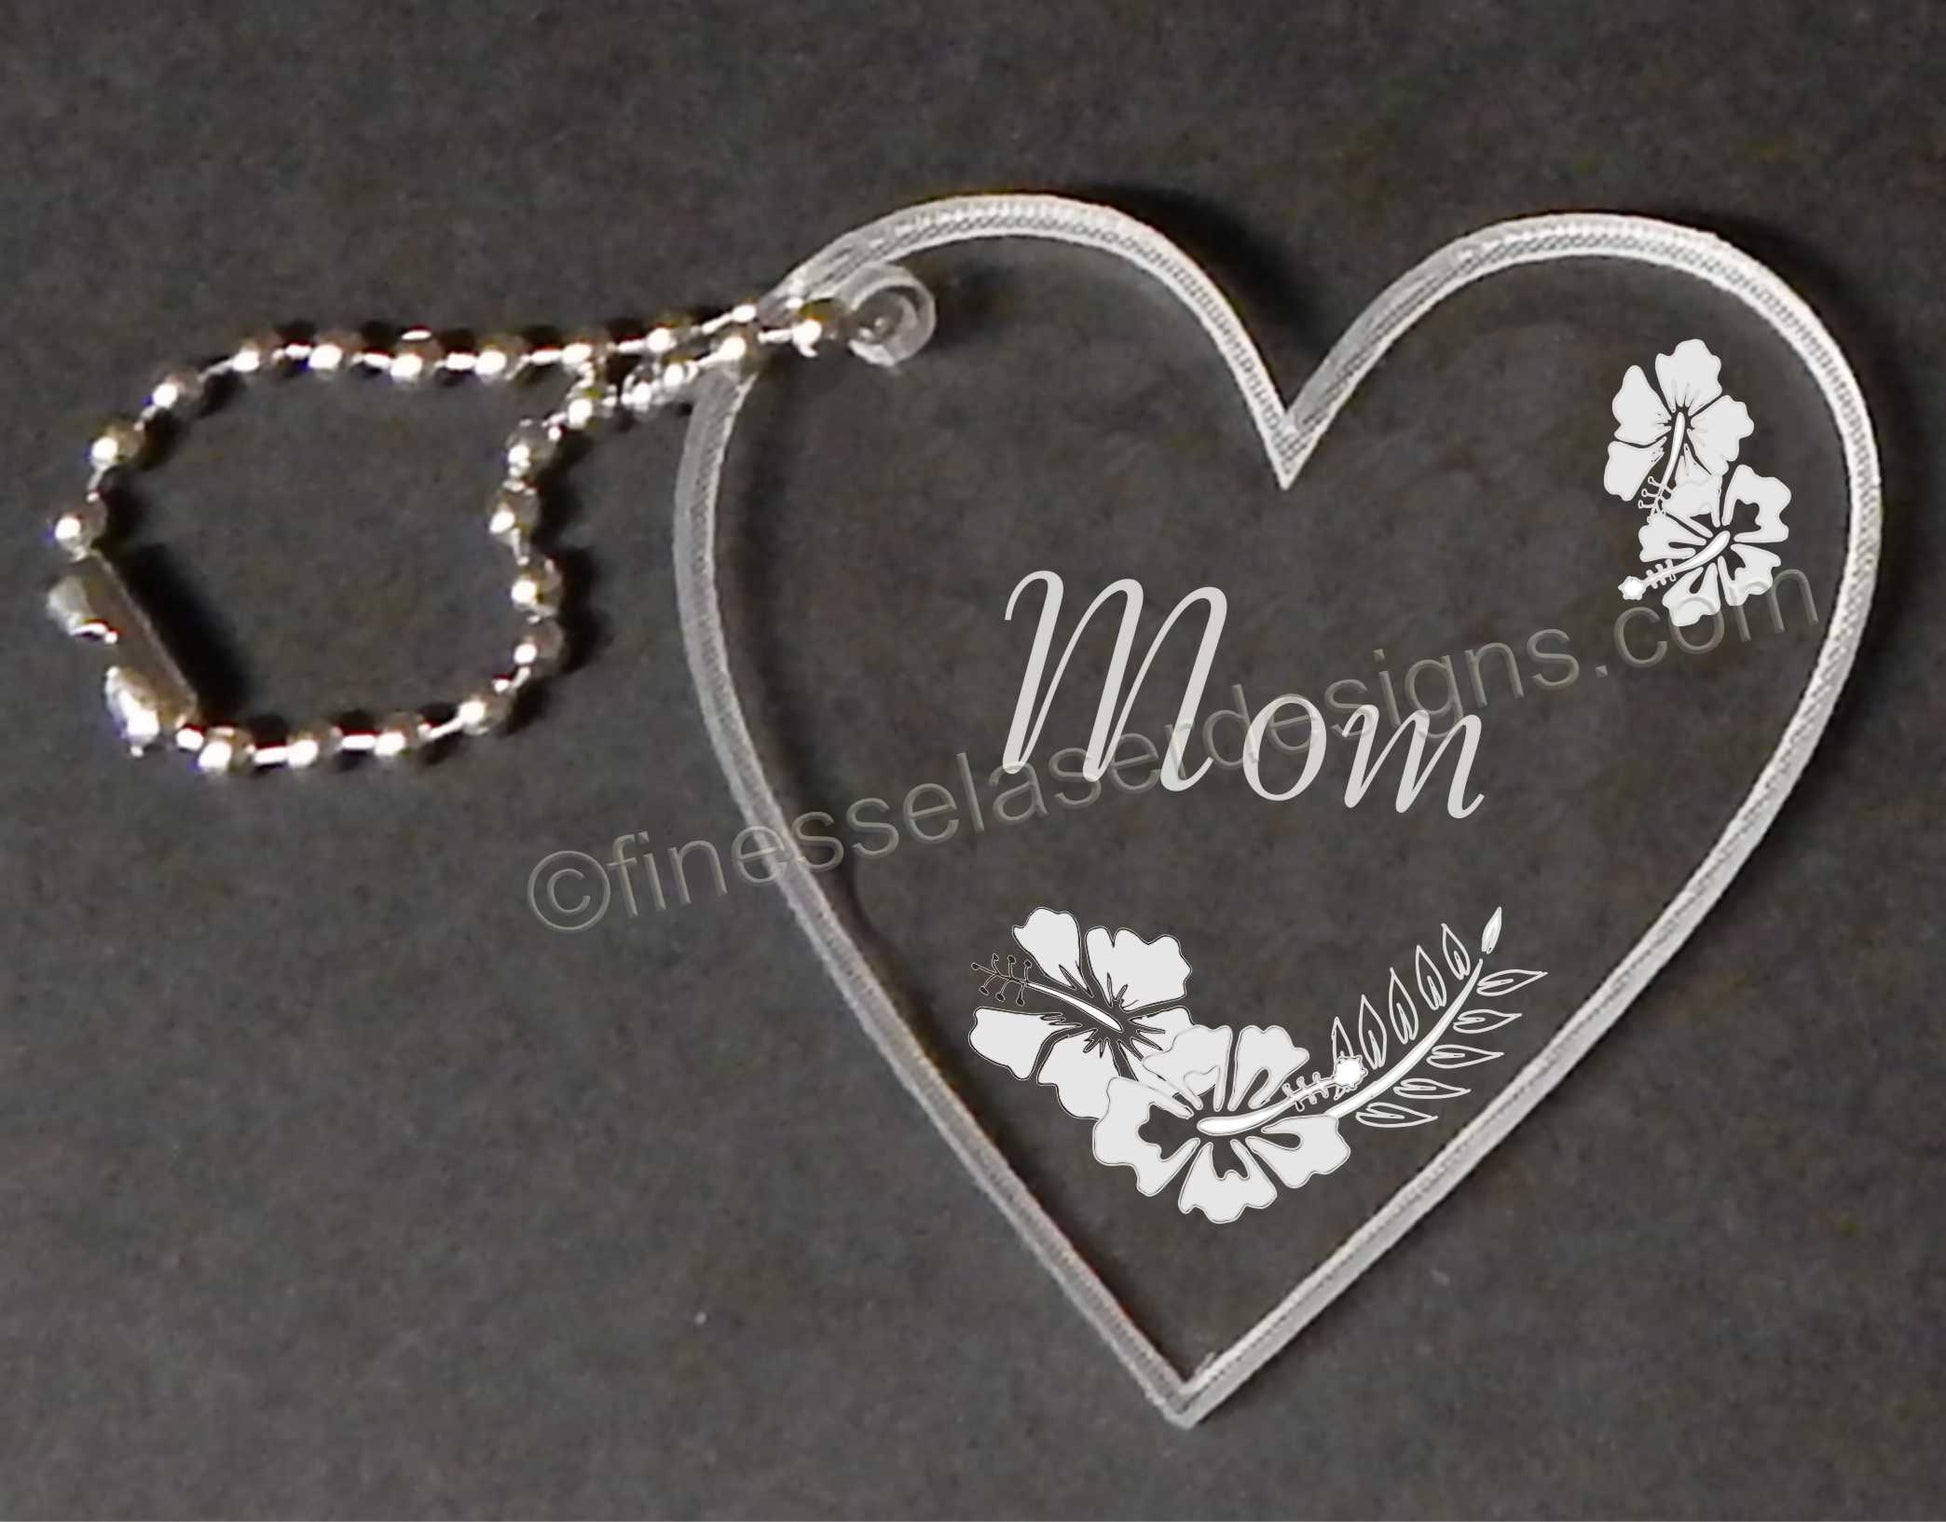 heart shaped acrylic key chain with hibiscus hearts and Mom engraved including a small metal chain attached